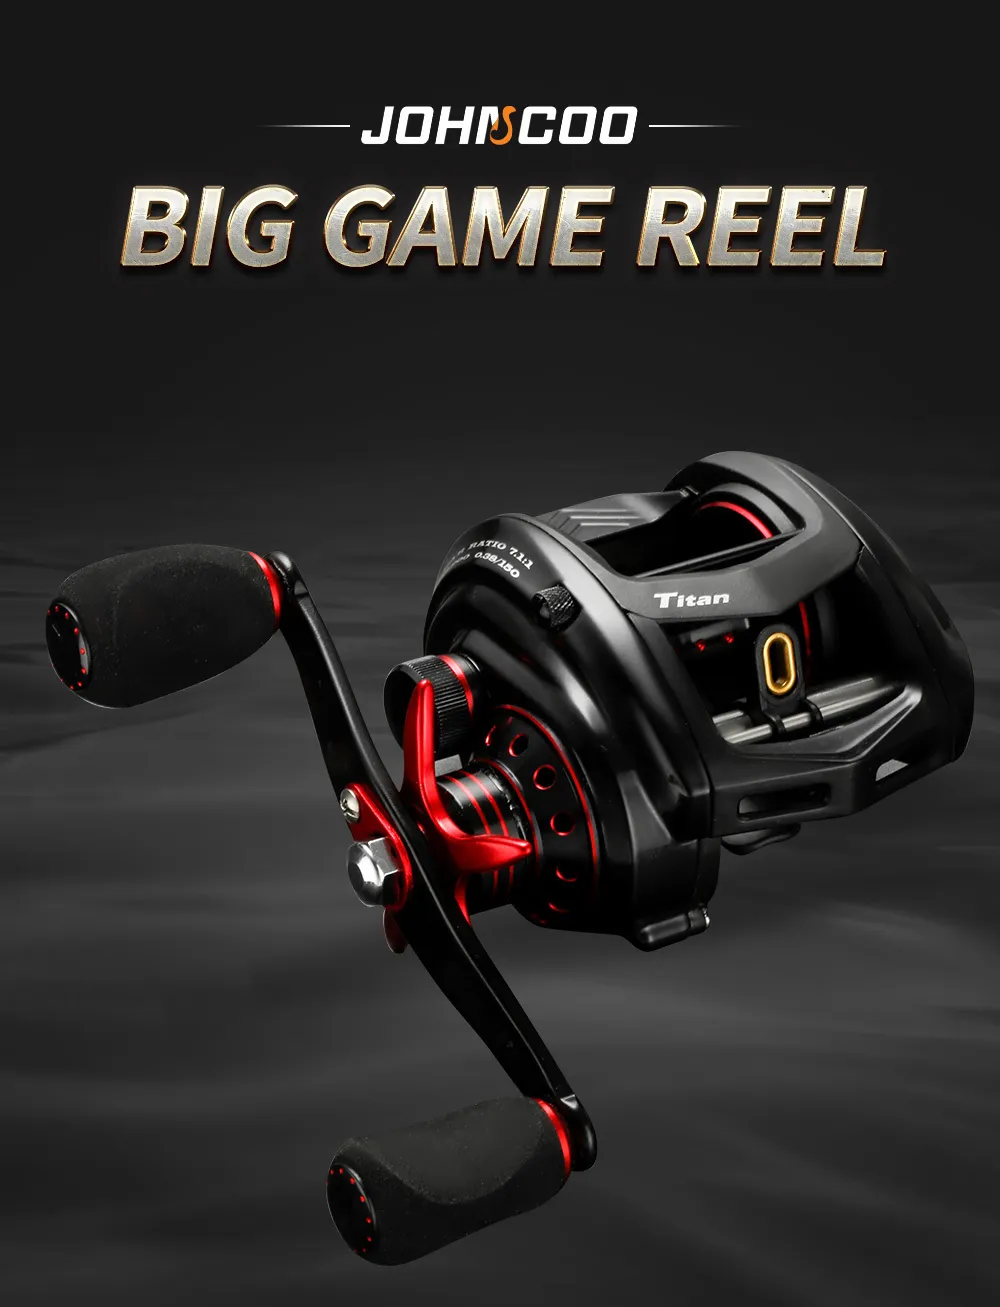 JOHNCOO MT200 H20 Express Baitcast Reel 13kg Max Drag For Big Game Jigging,  Compatible With 111 BB 71 1 Batteries From Zhao09, $43.43